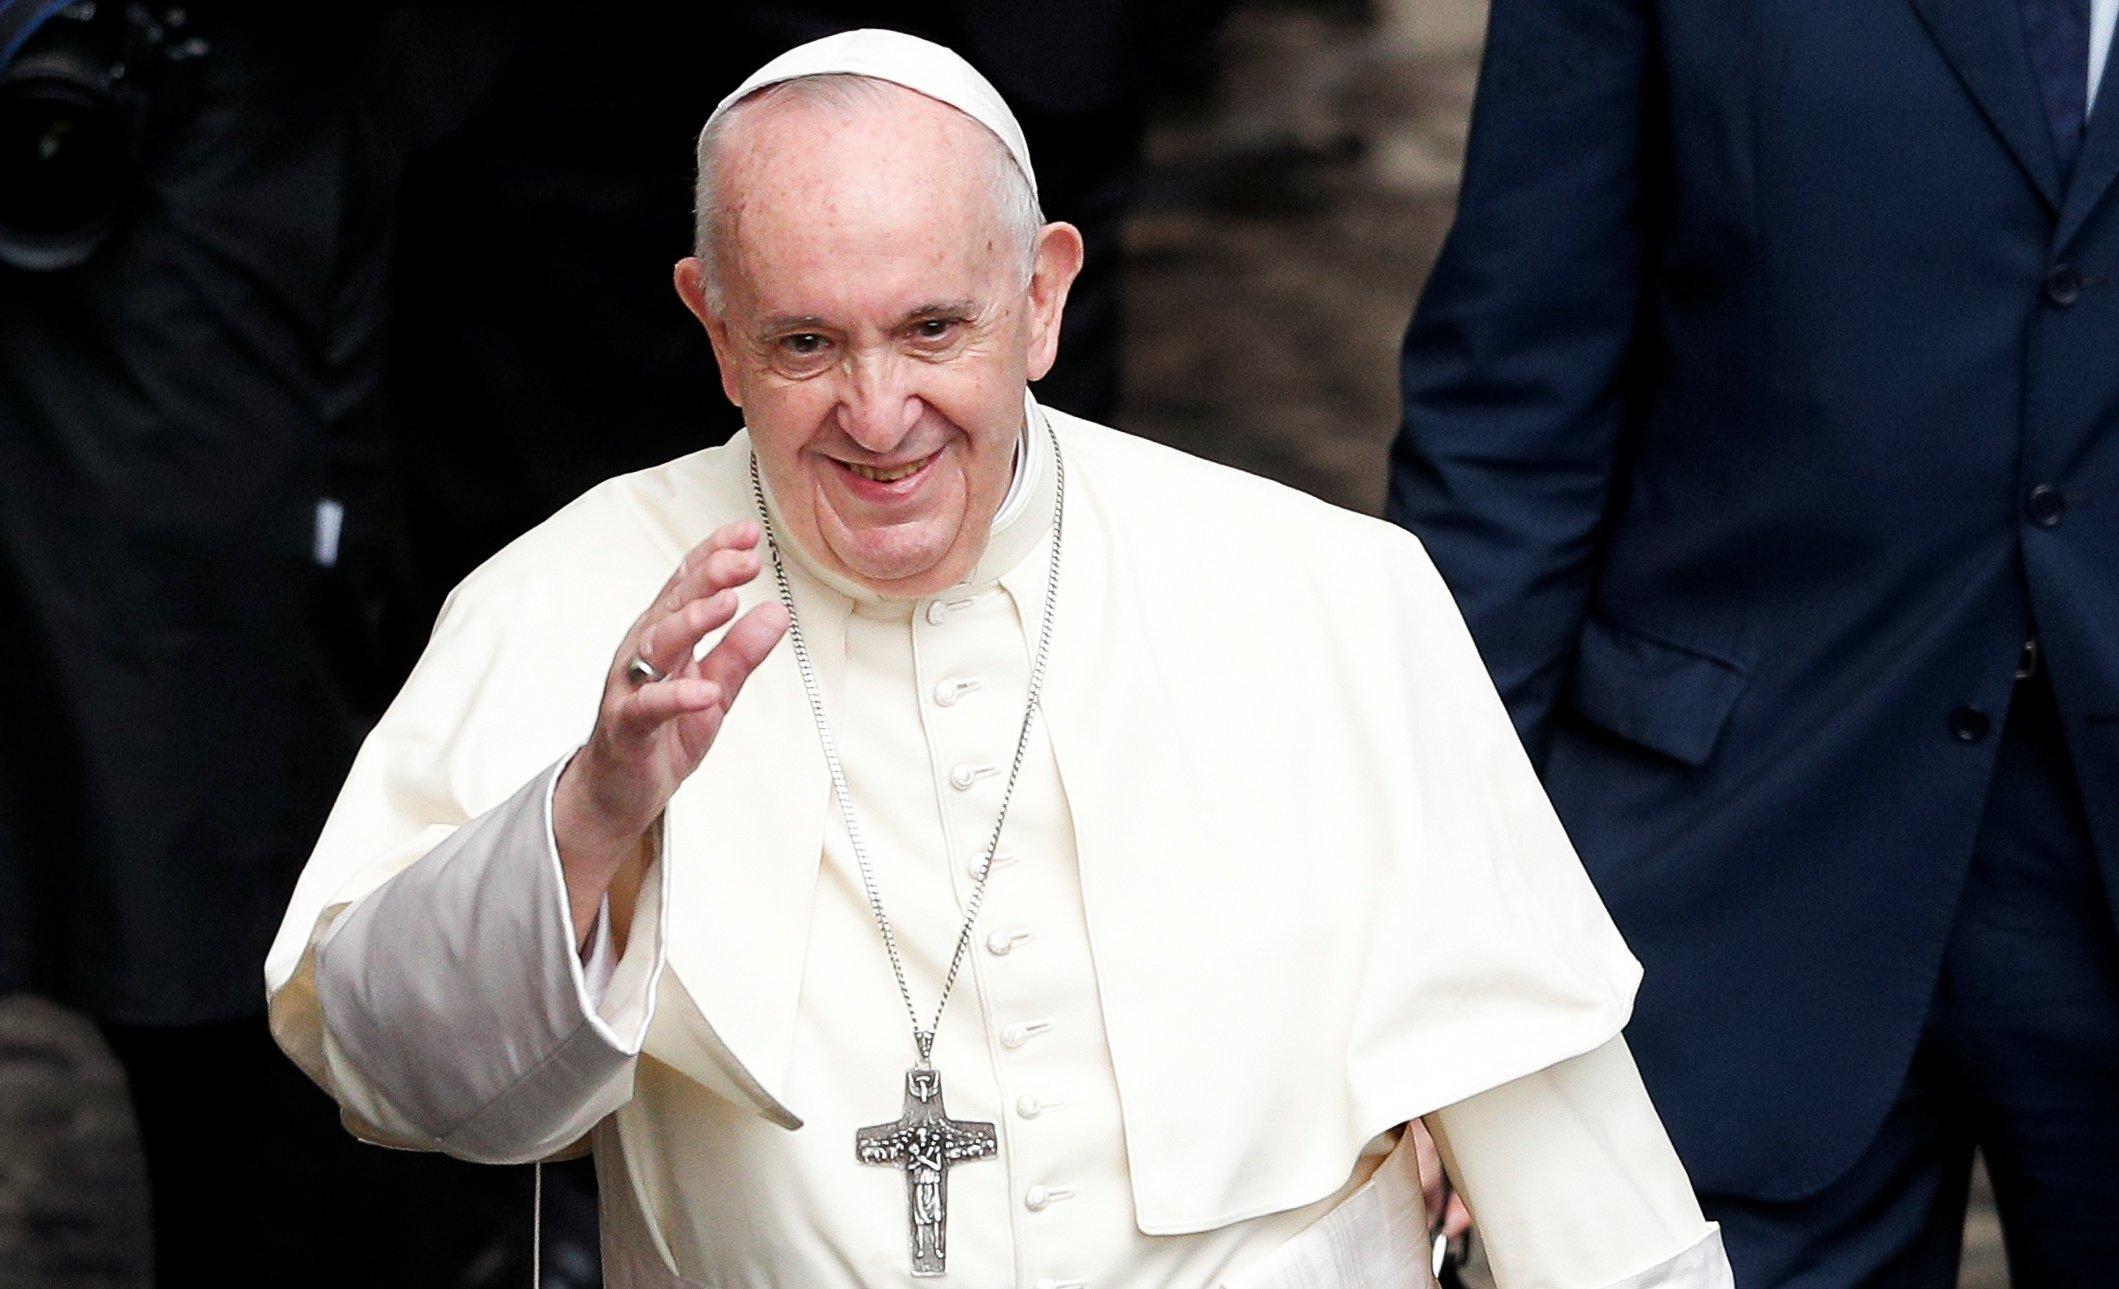 Pope Francis Indicates Support For Same-Sex Civil Unions